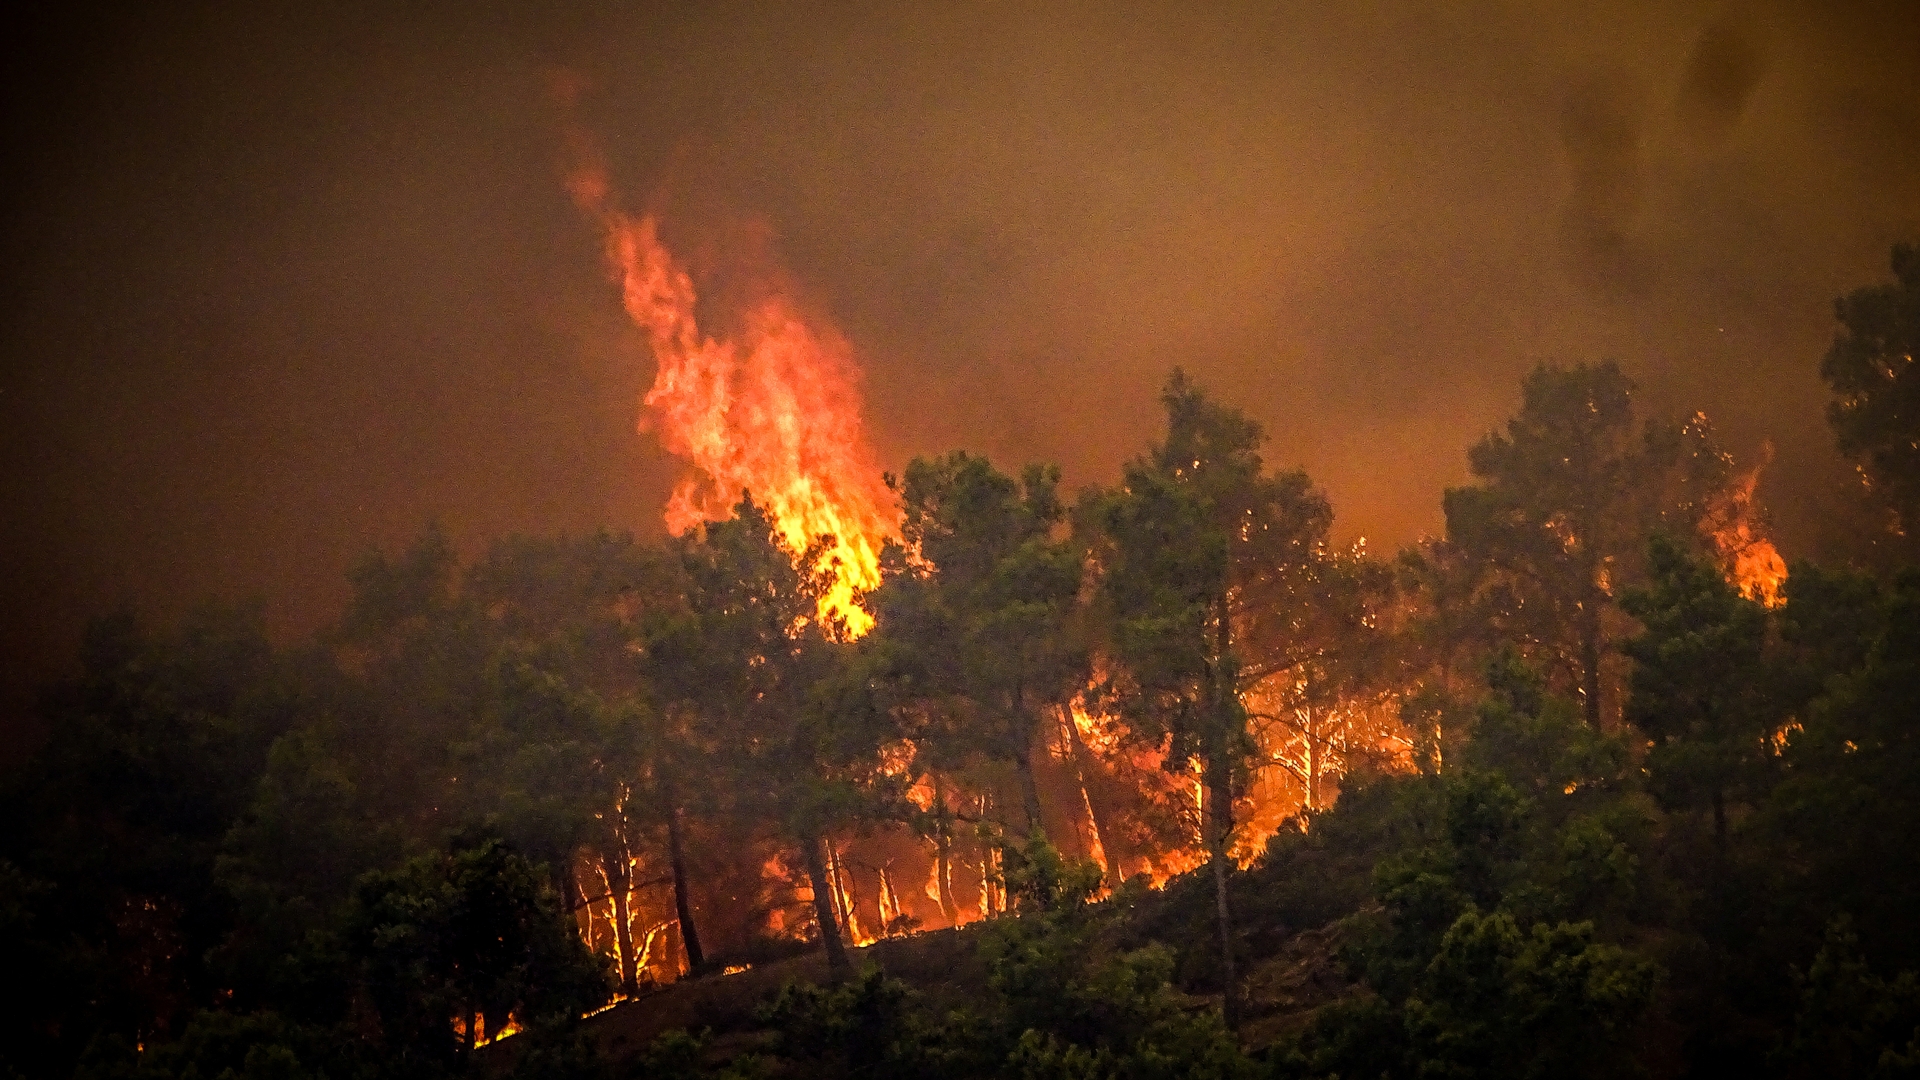 Can I travel to Greece safely during wildfires in Greece?